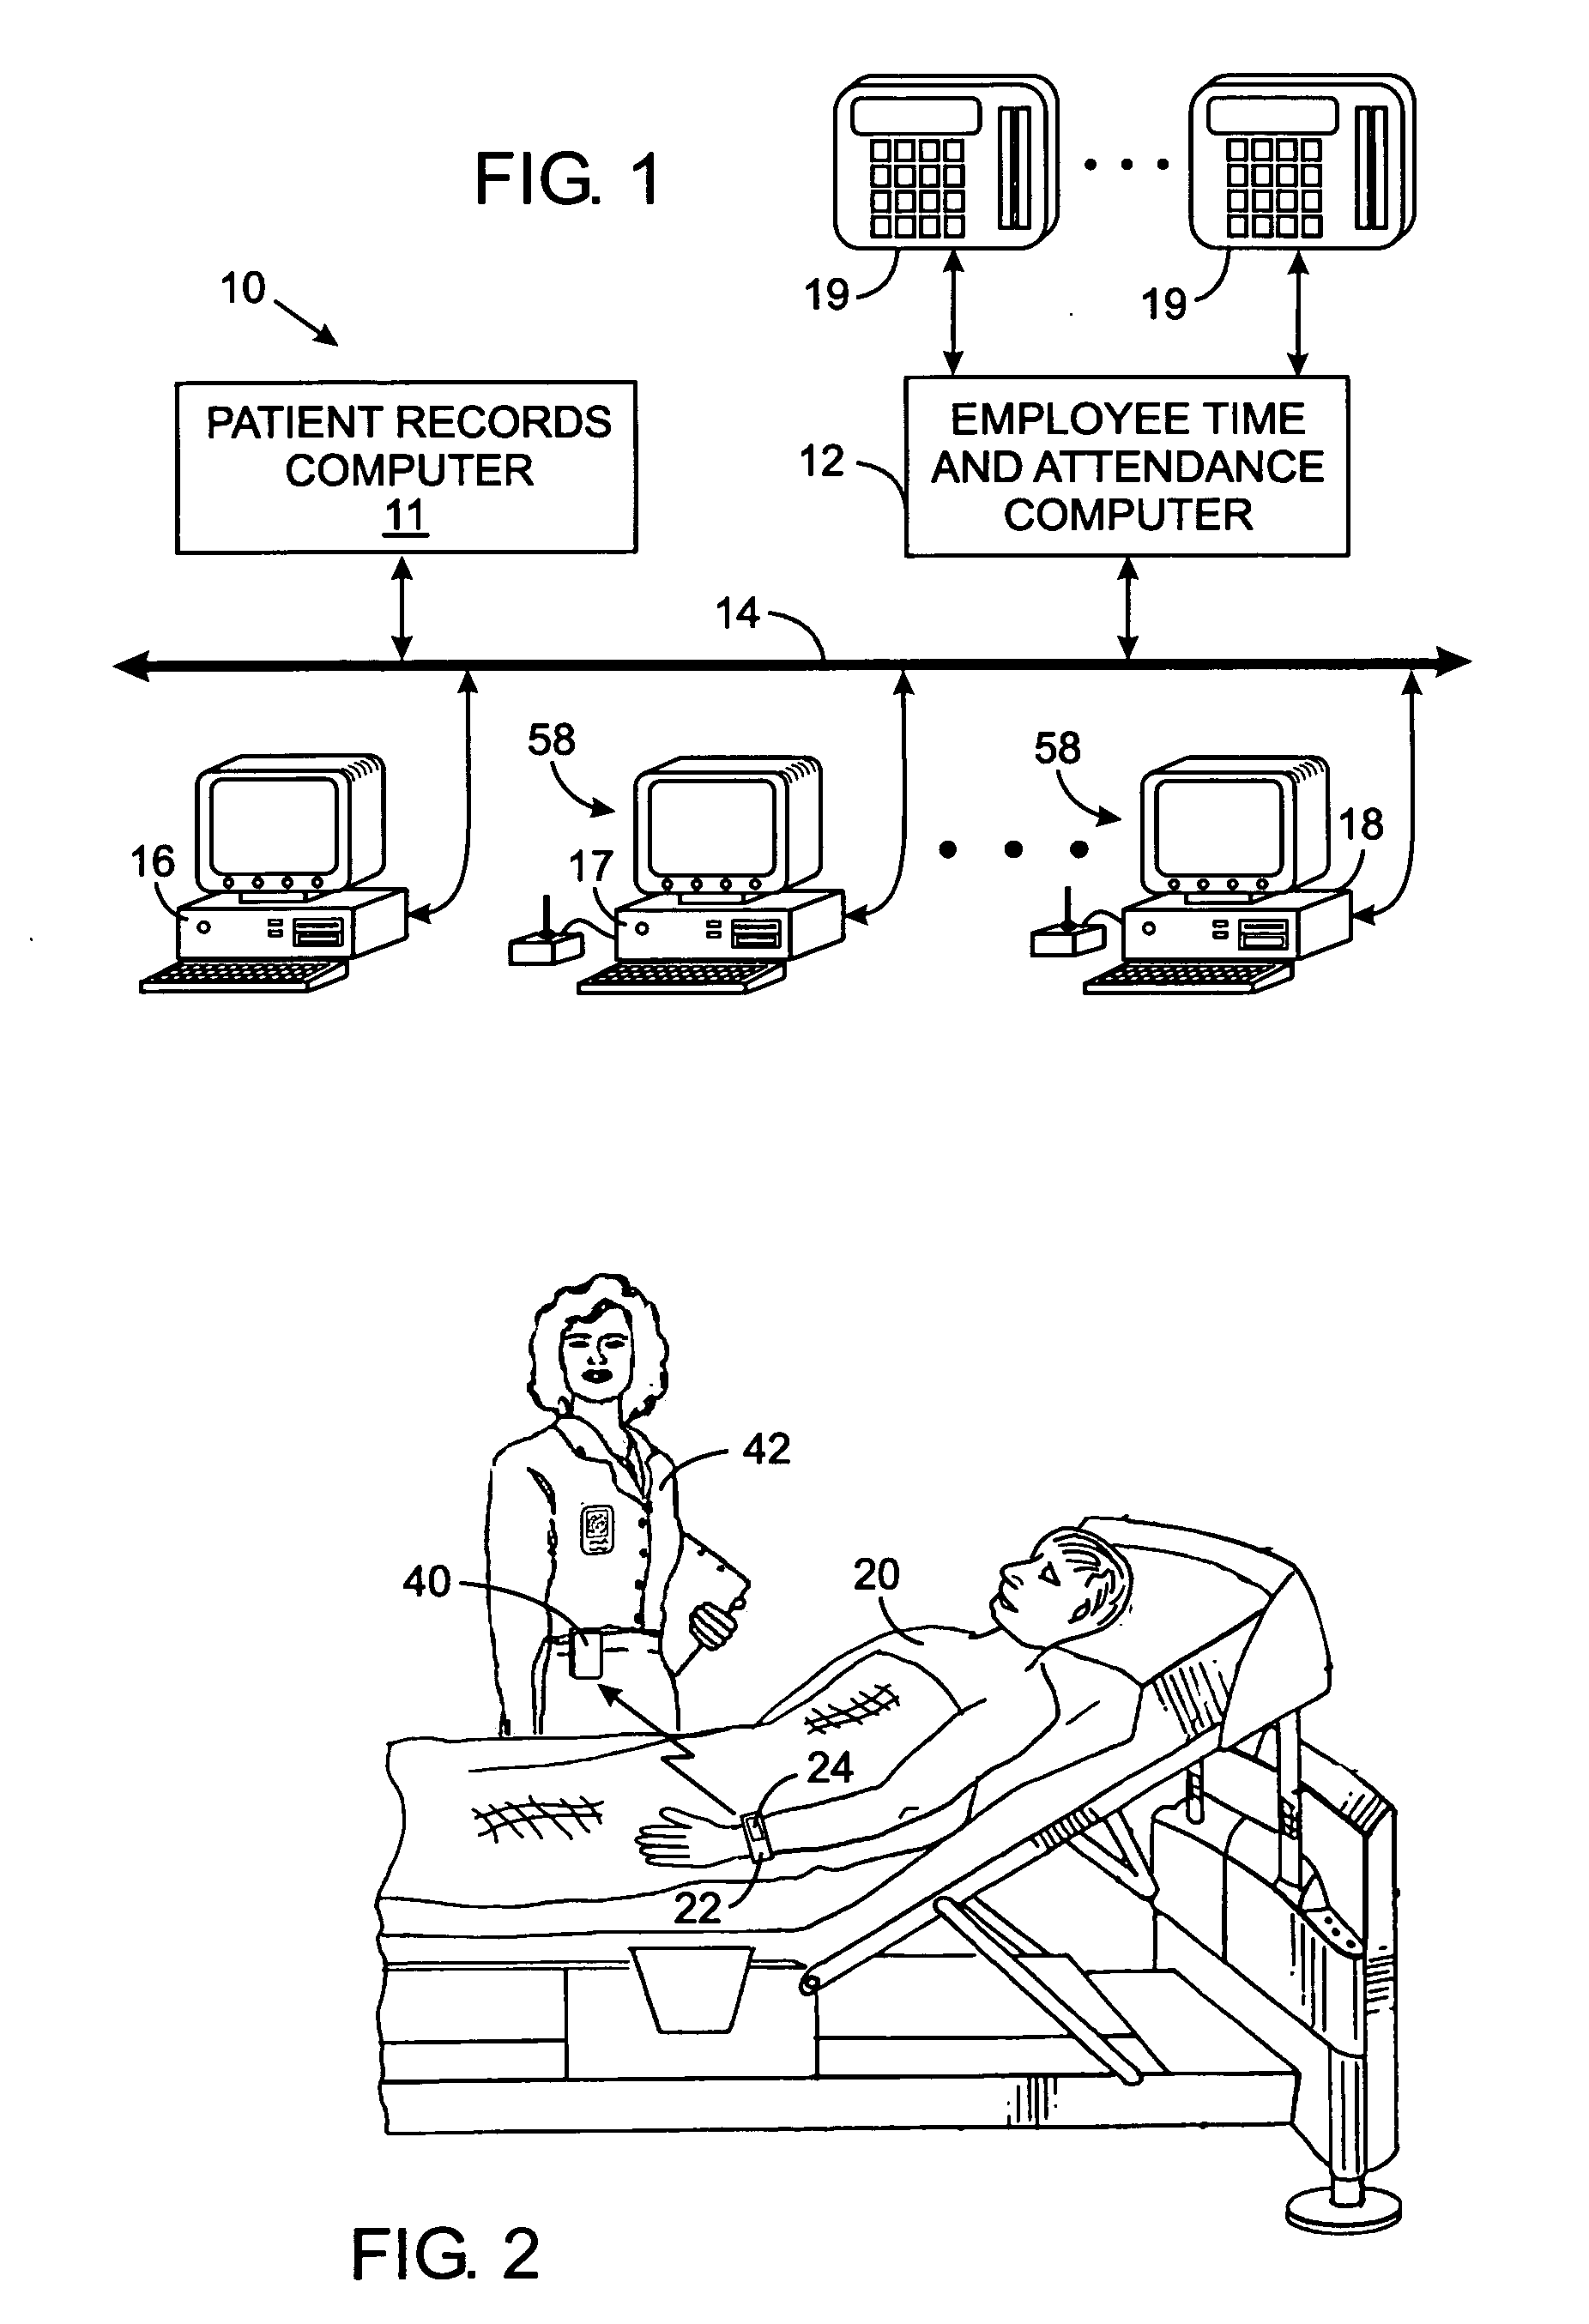 System for automatically tallying time spent by medical personnel attending to patients